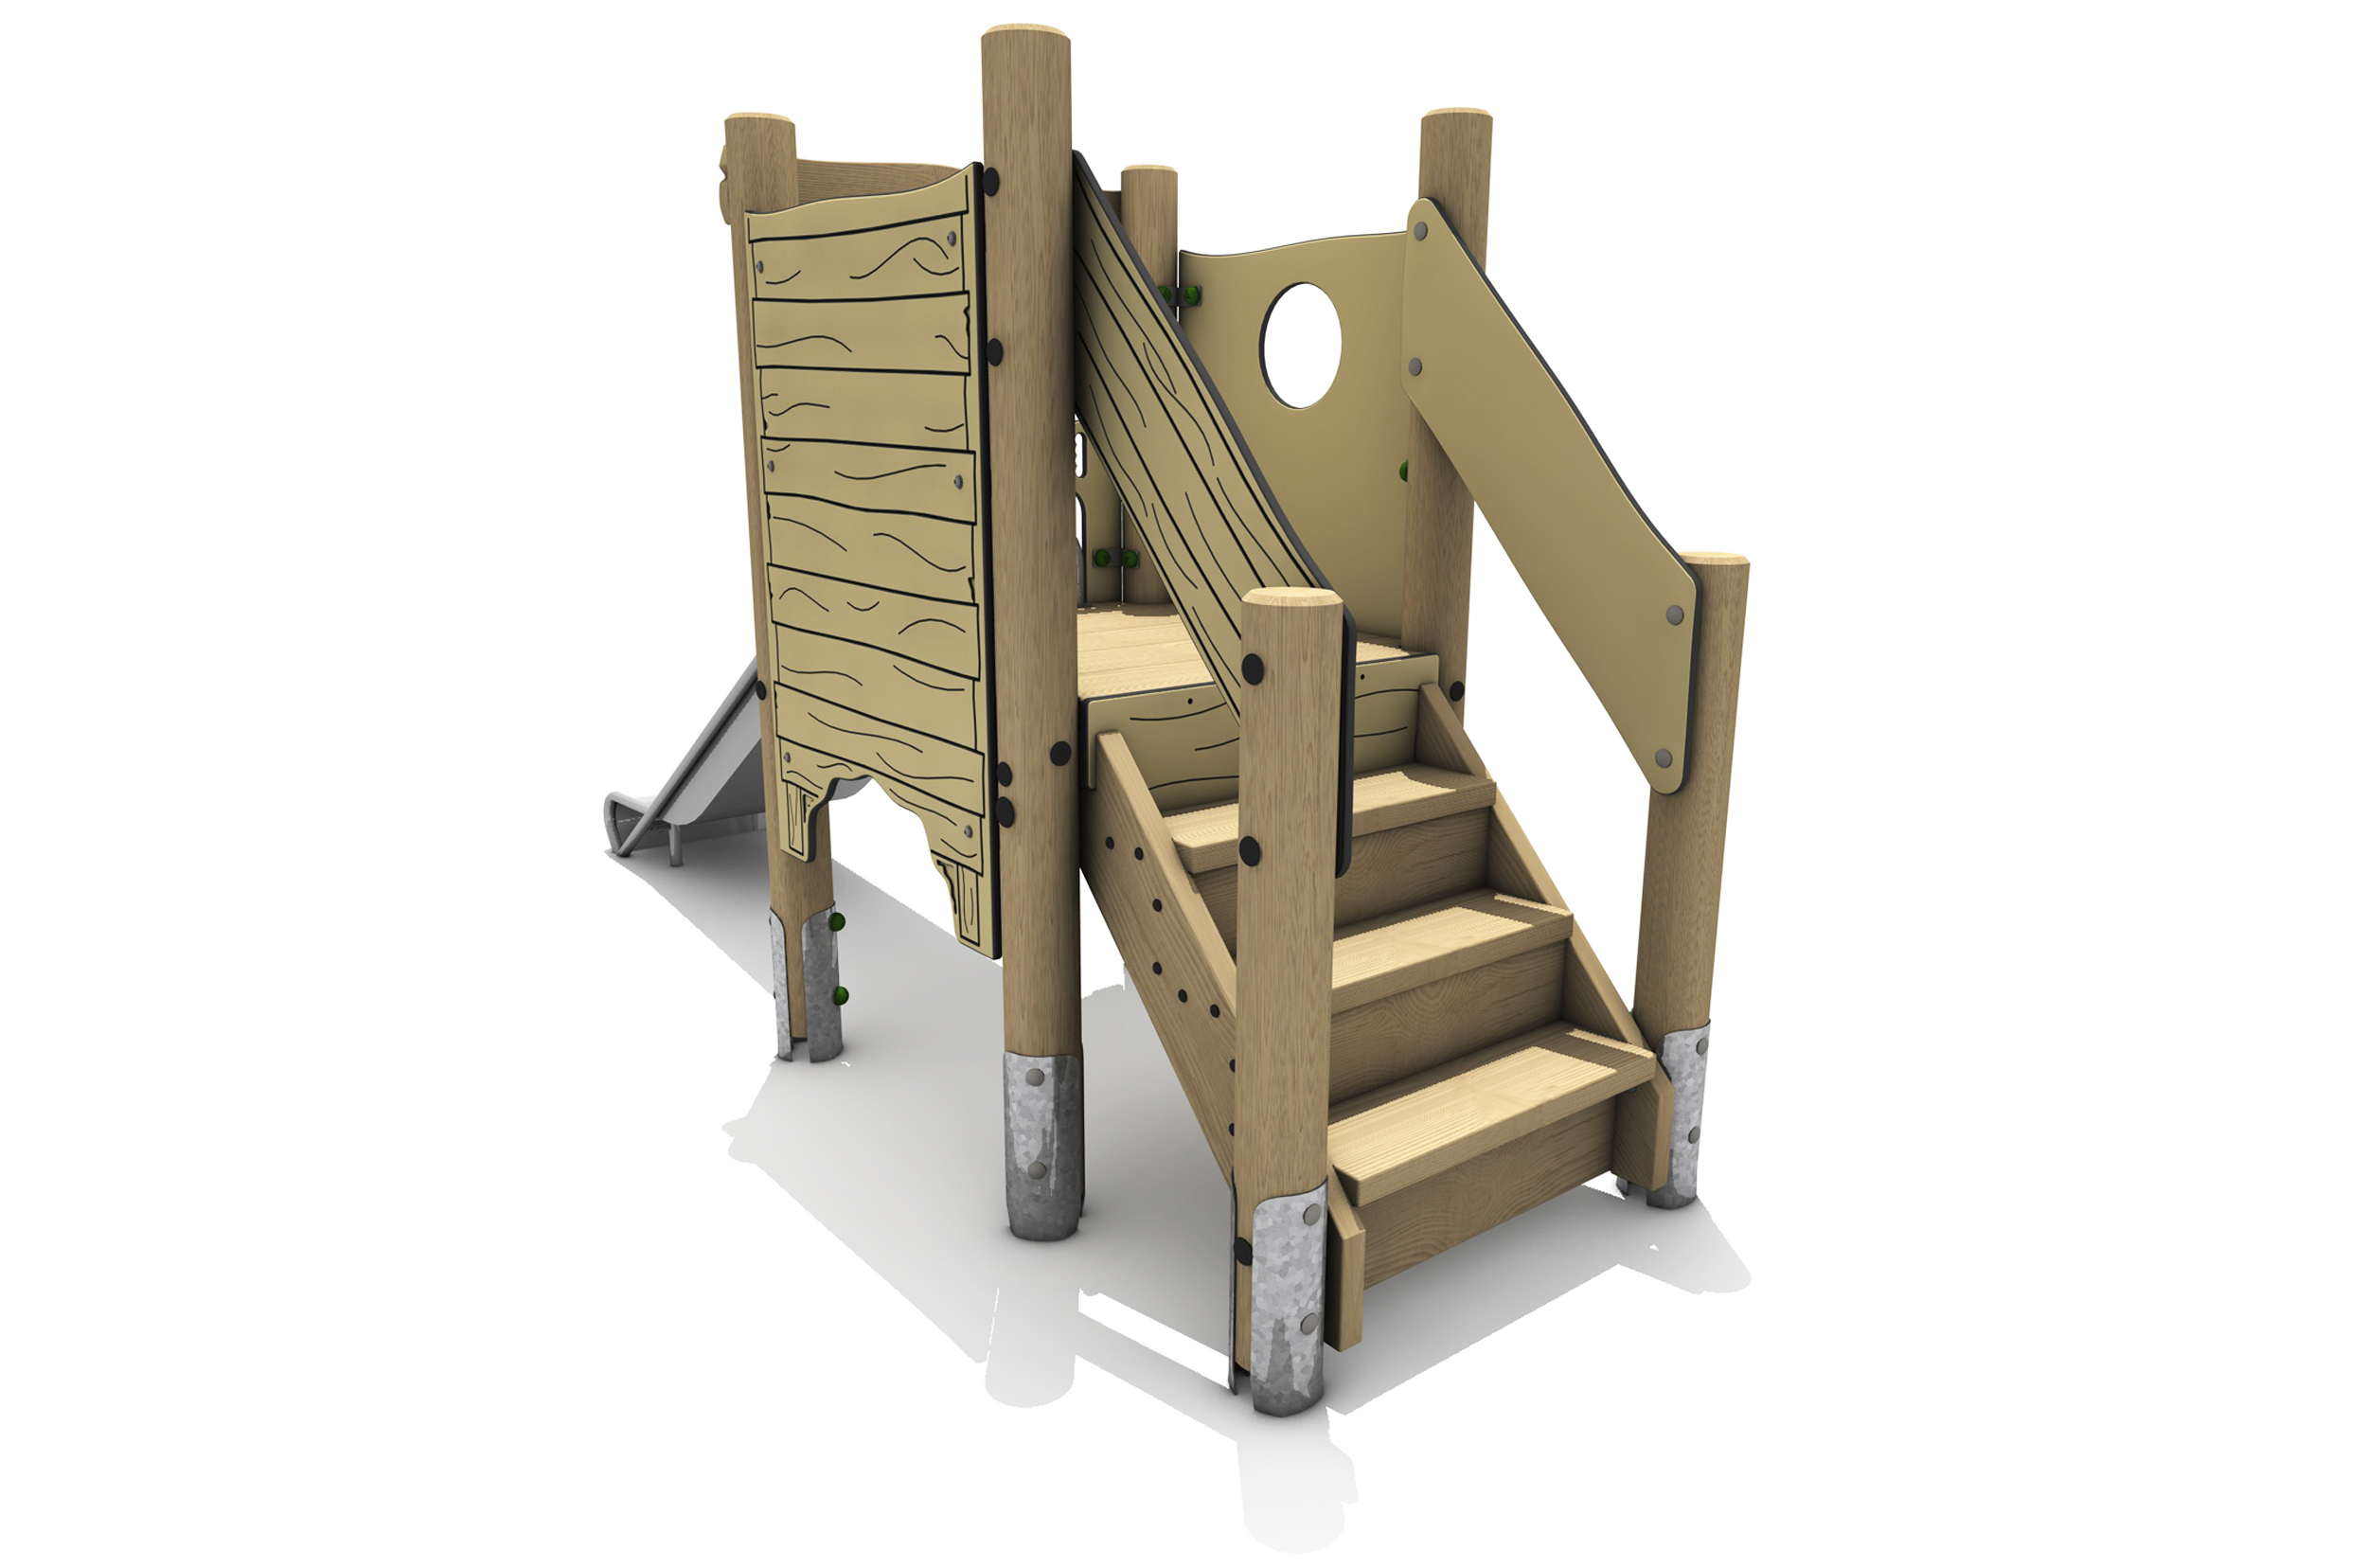 Timber Tower Single Deck 01, A timber tower climber with access steps and handrail